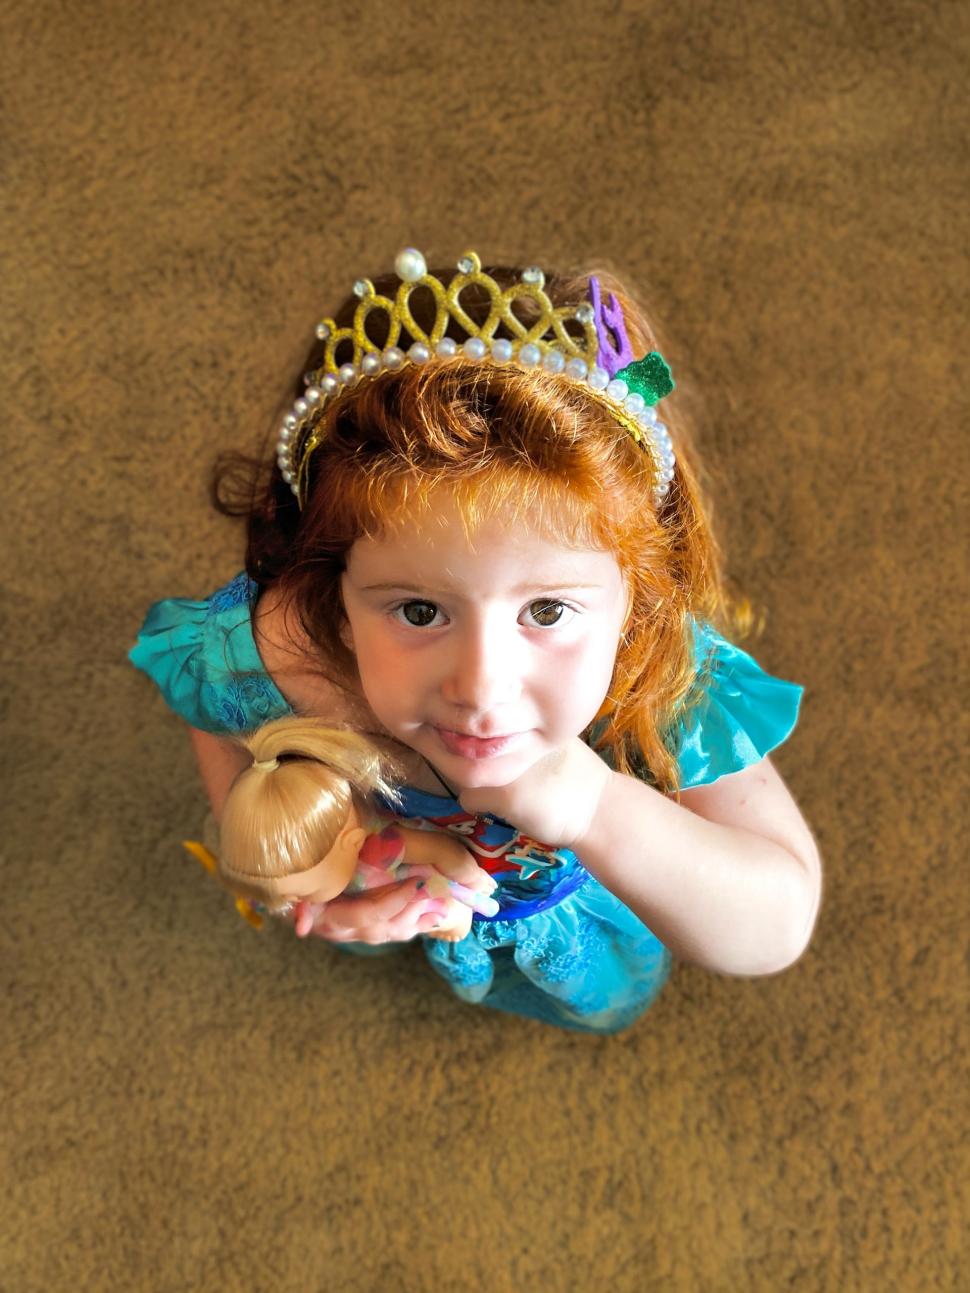 A little girl in a princess dress and crown holds a stuffed animal.